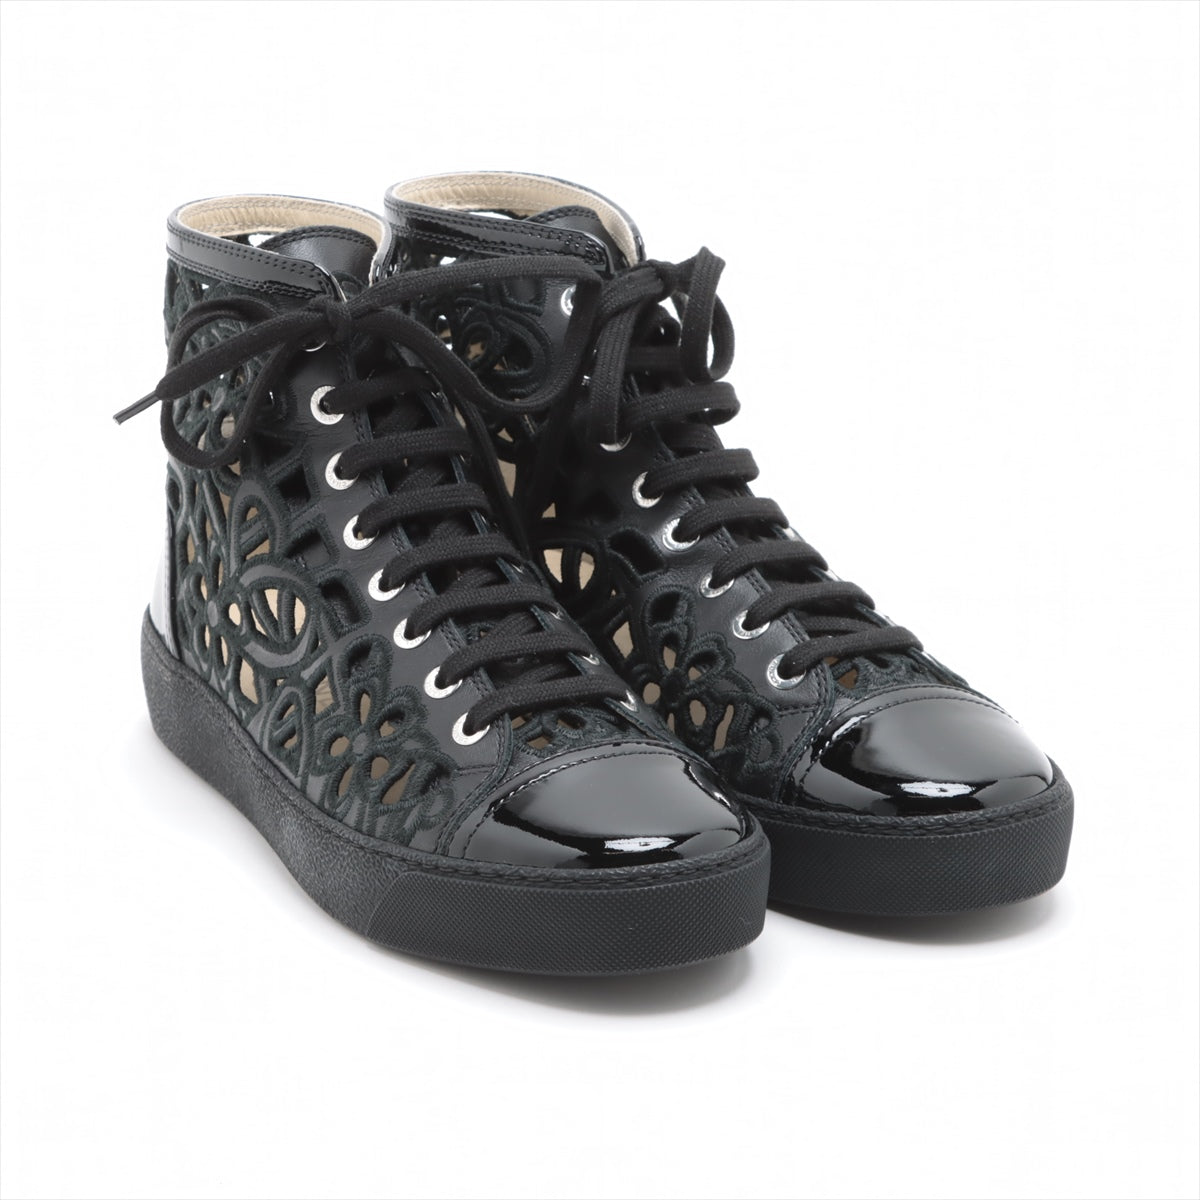 Chanel Coco Mark Leather x fabric High-top Sneakers 38 Ladies' Black floral lace box There is a bag